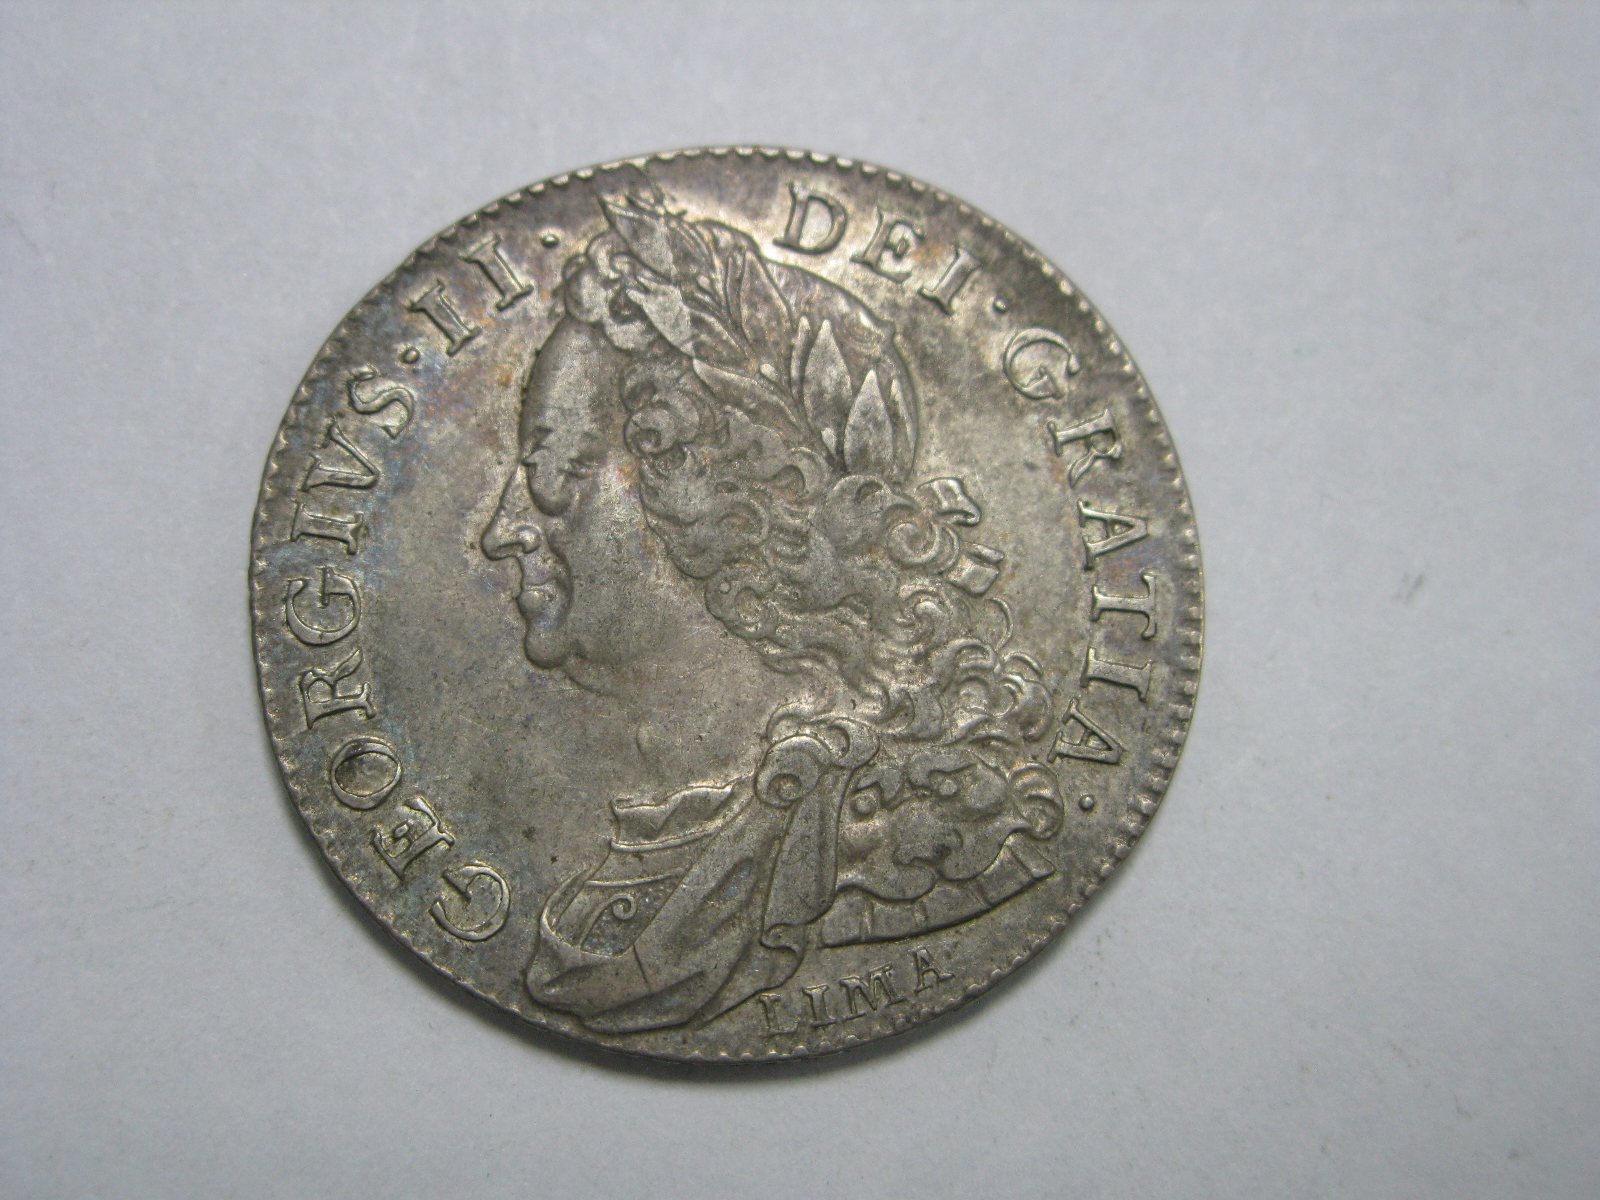 George II Half Crown Lima, in good very fine, toned, very good detail, clear date and Lima